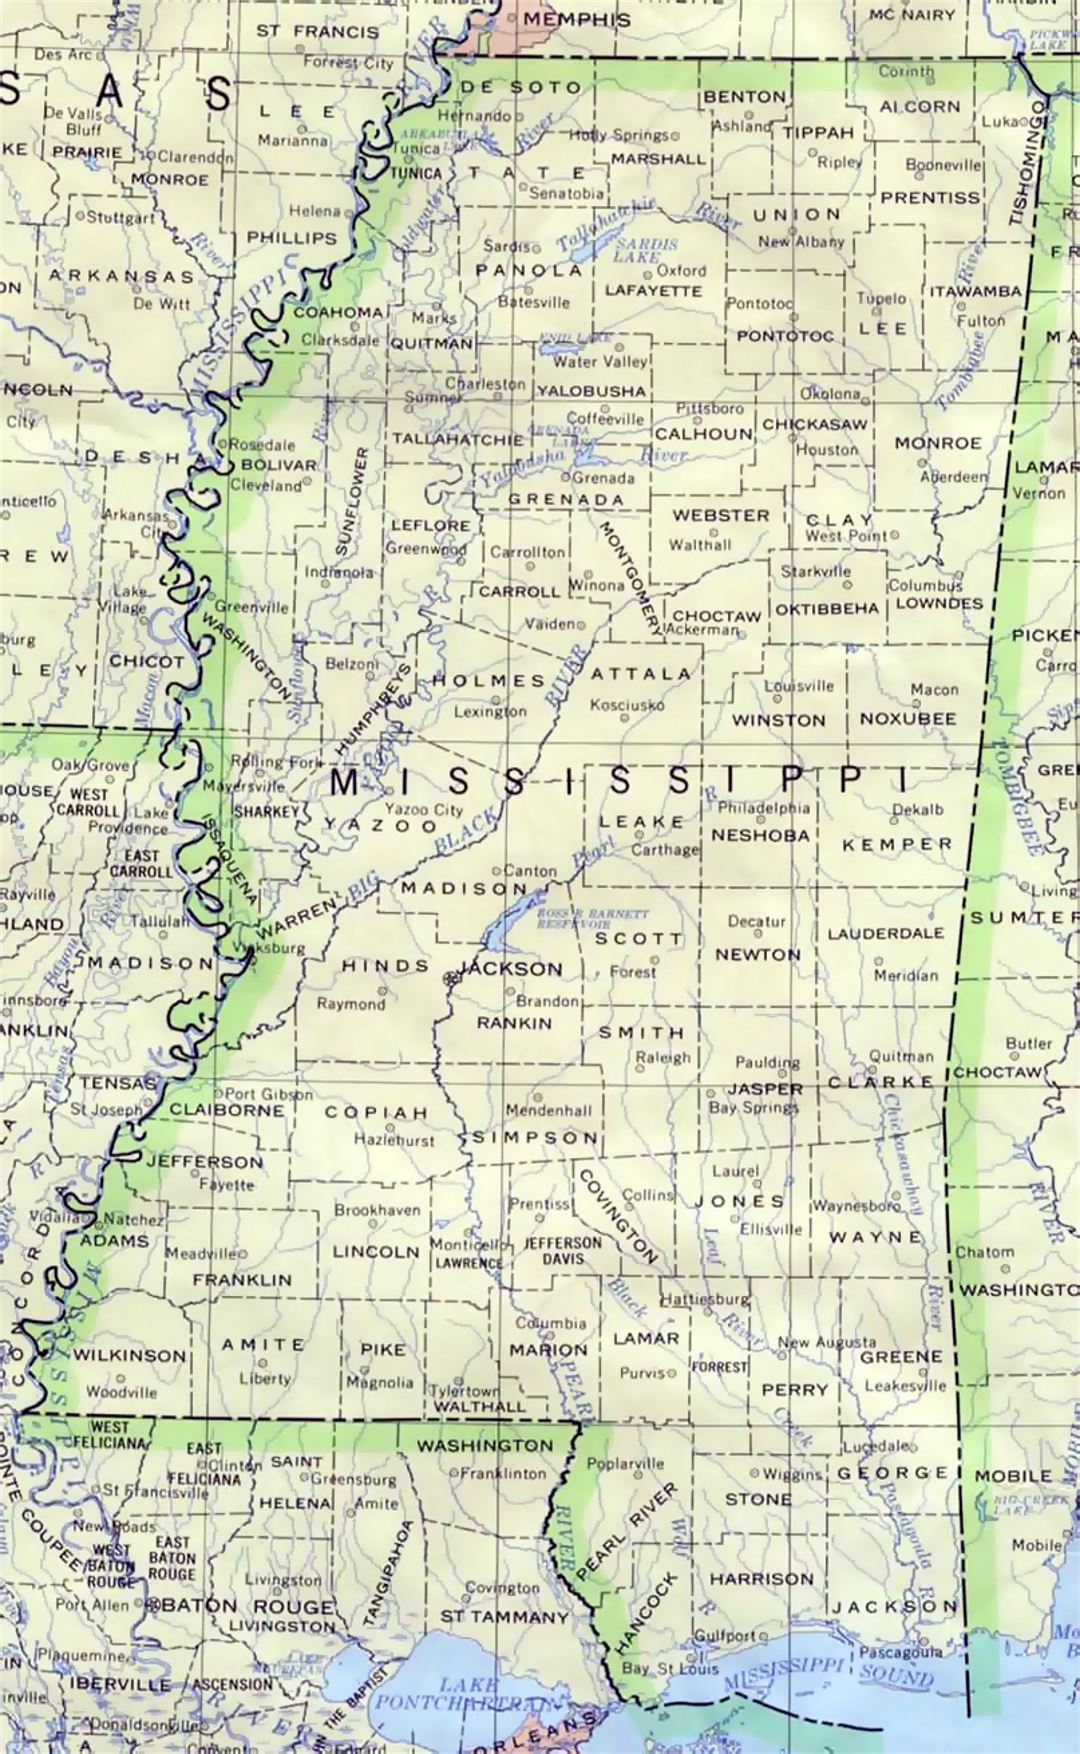 Administrative map of Mississippi state